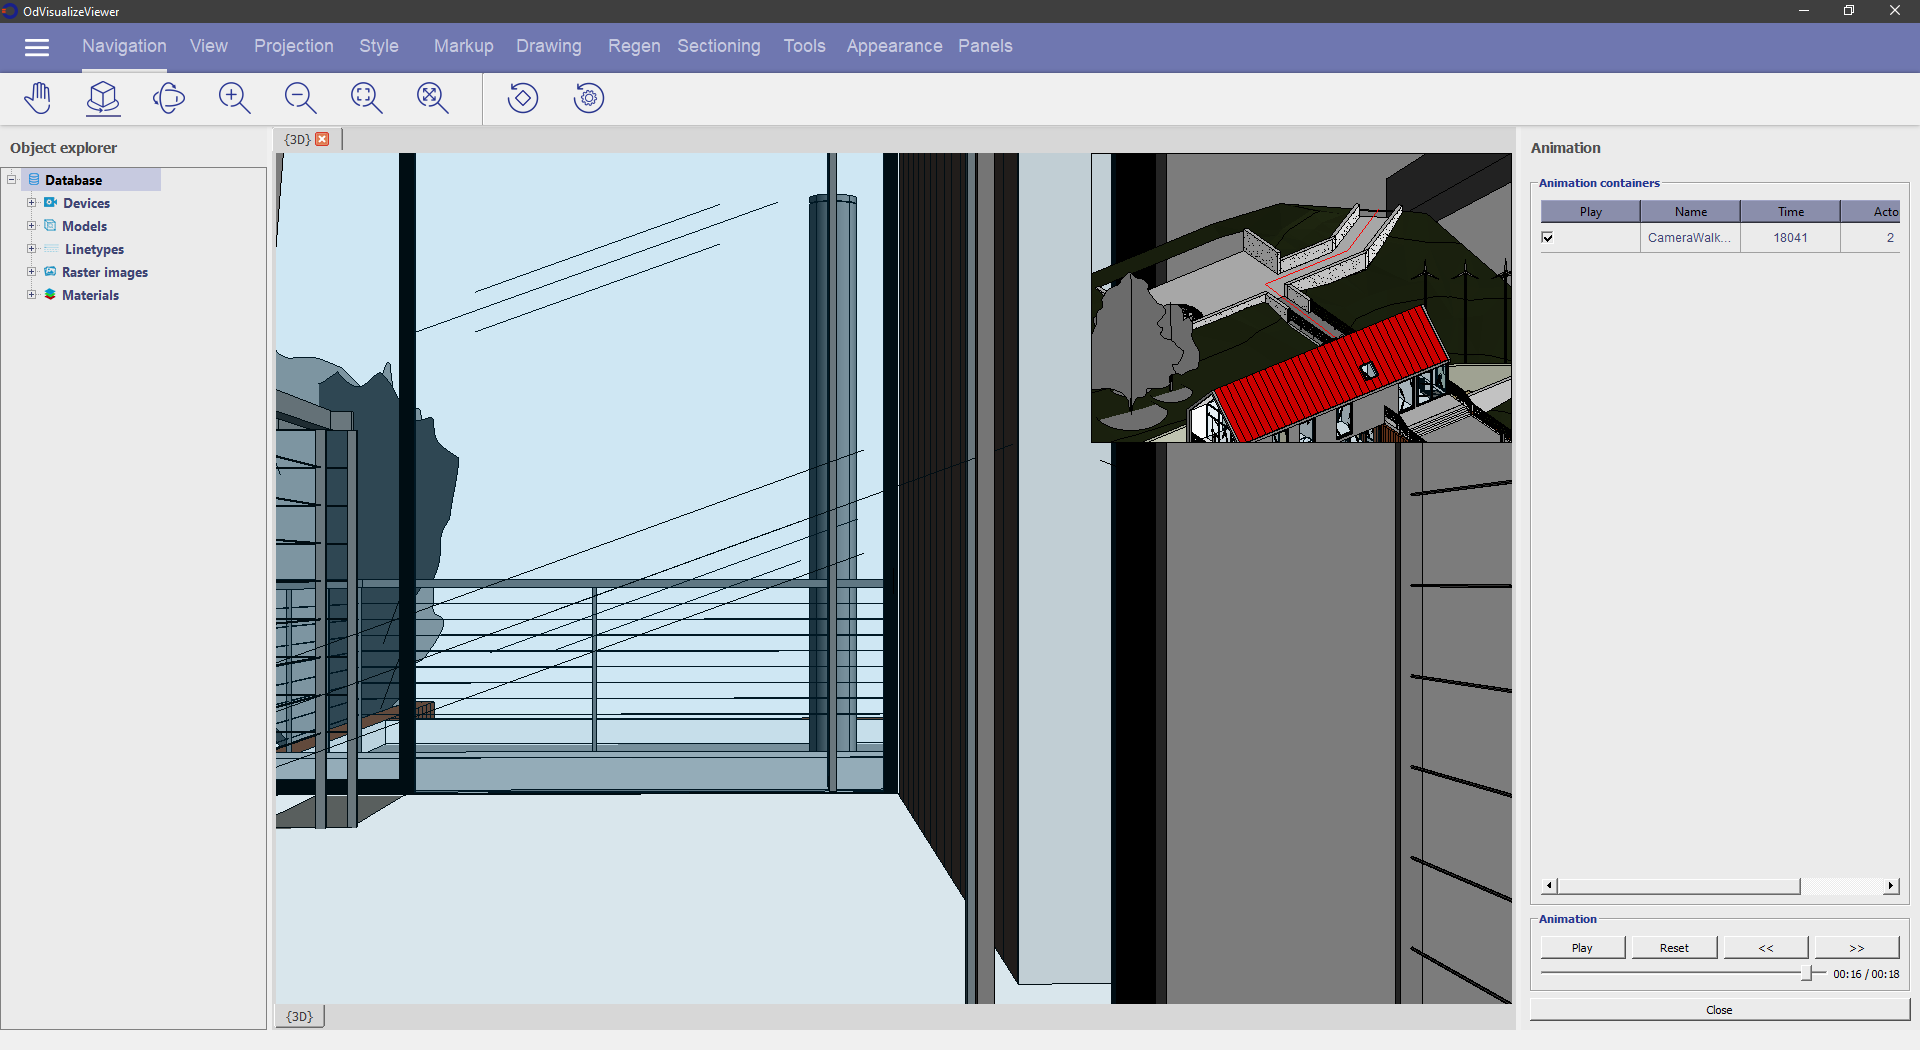 Screen capture of a building walk-through generated by ODA Visualize SDK